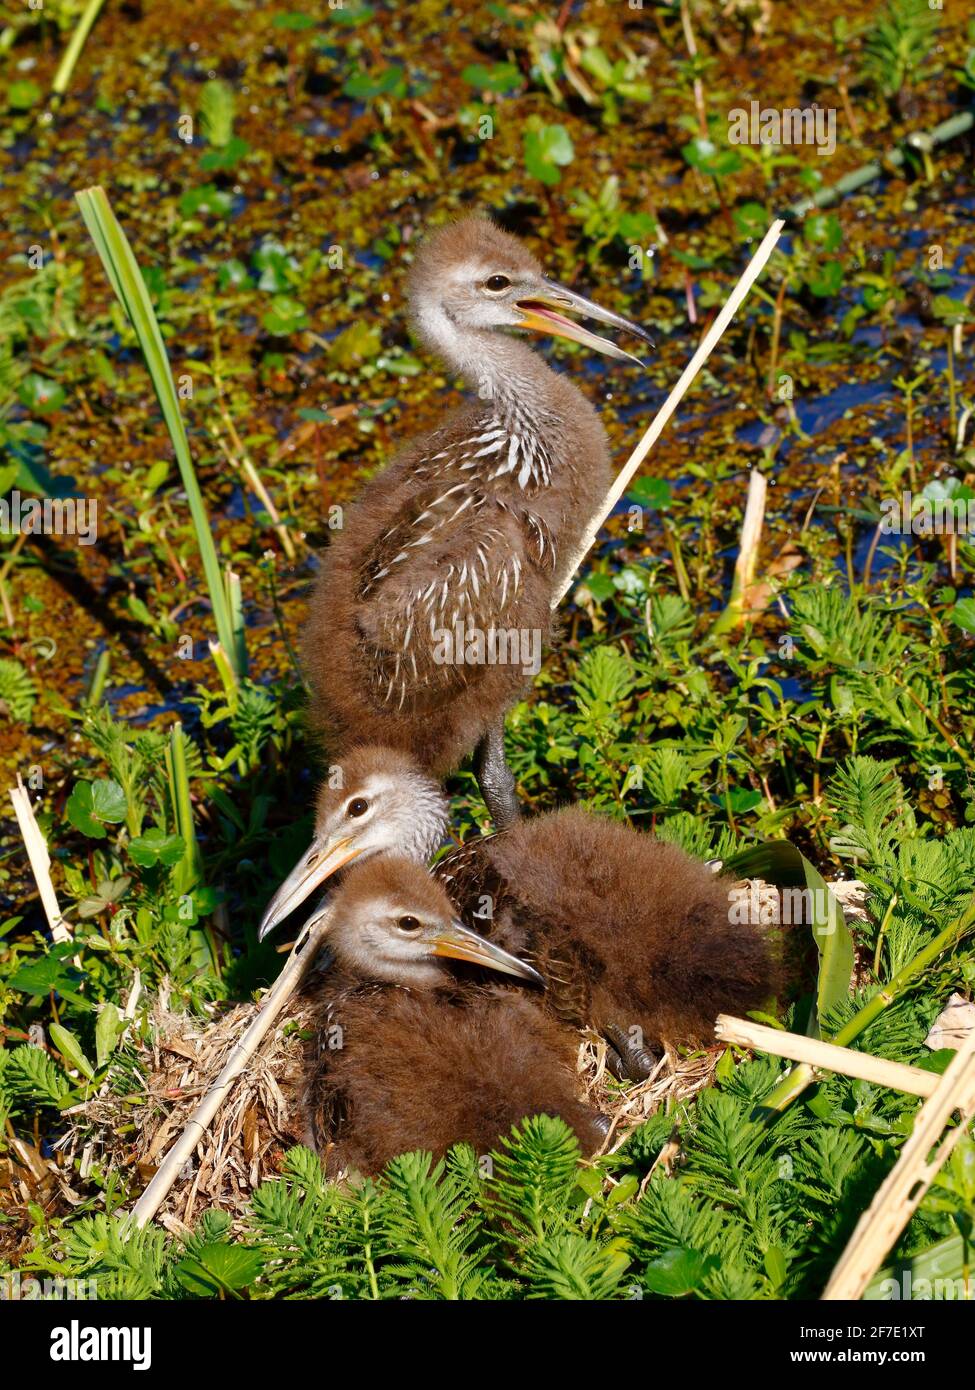 Young limpkins, Aramus guarauna, are left hiding together as the parents forage. Stock Photo